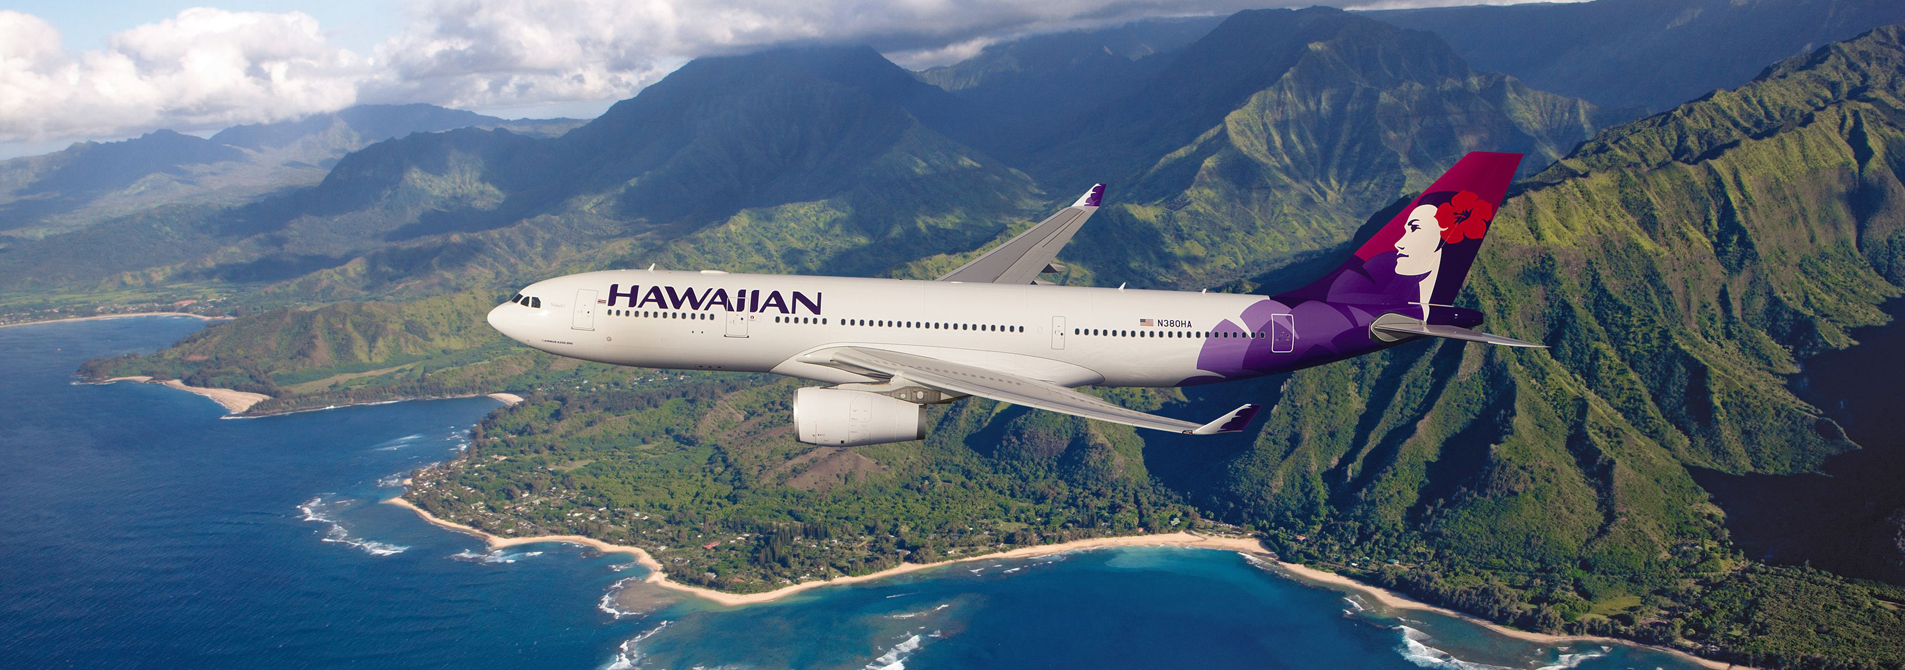   Hawaiian Airlines  reduced the number of steps to book shipments from 7 to just 1 by changing to  SmartKargo .   That’s Efficient!    